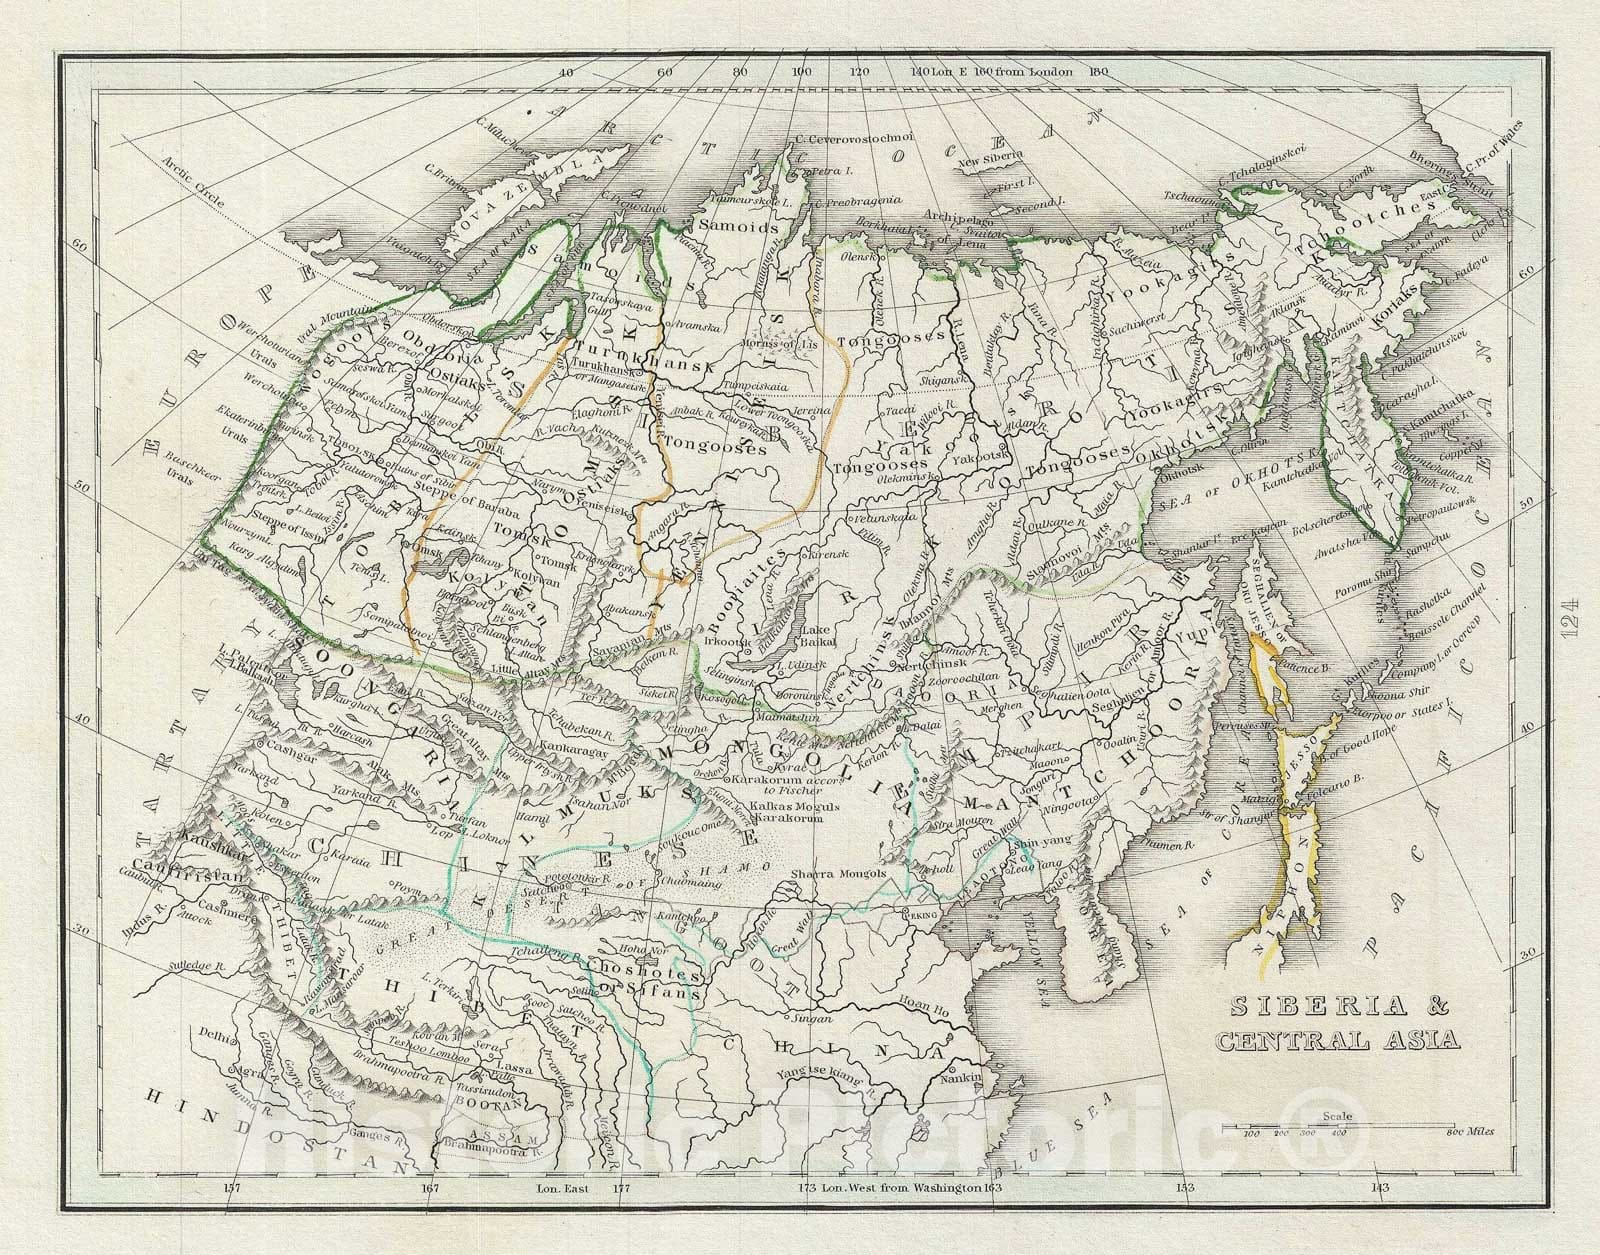 Historic Map : Siberia and Central Asia, BraArtd, 1835 v1, Vintage Wall Art